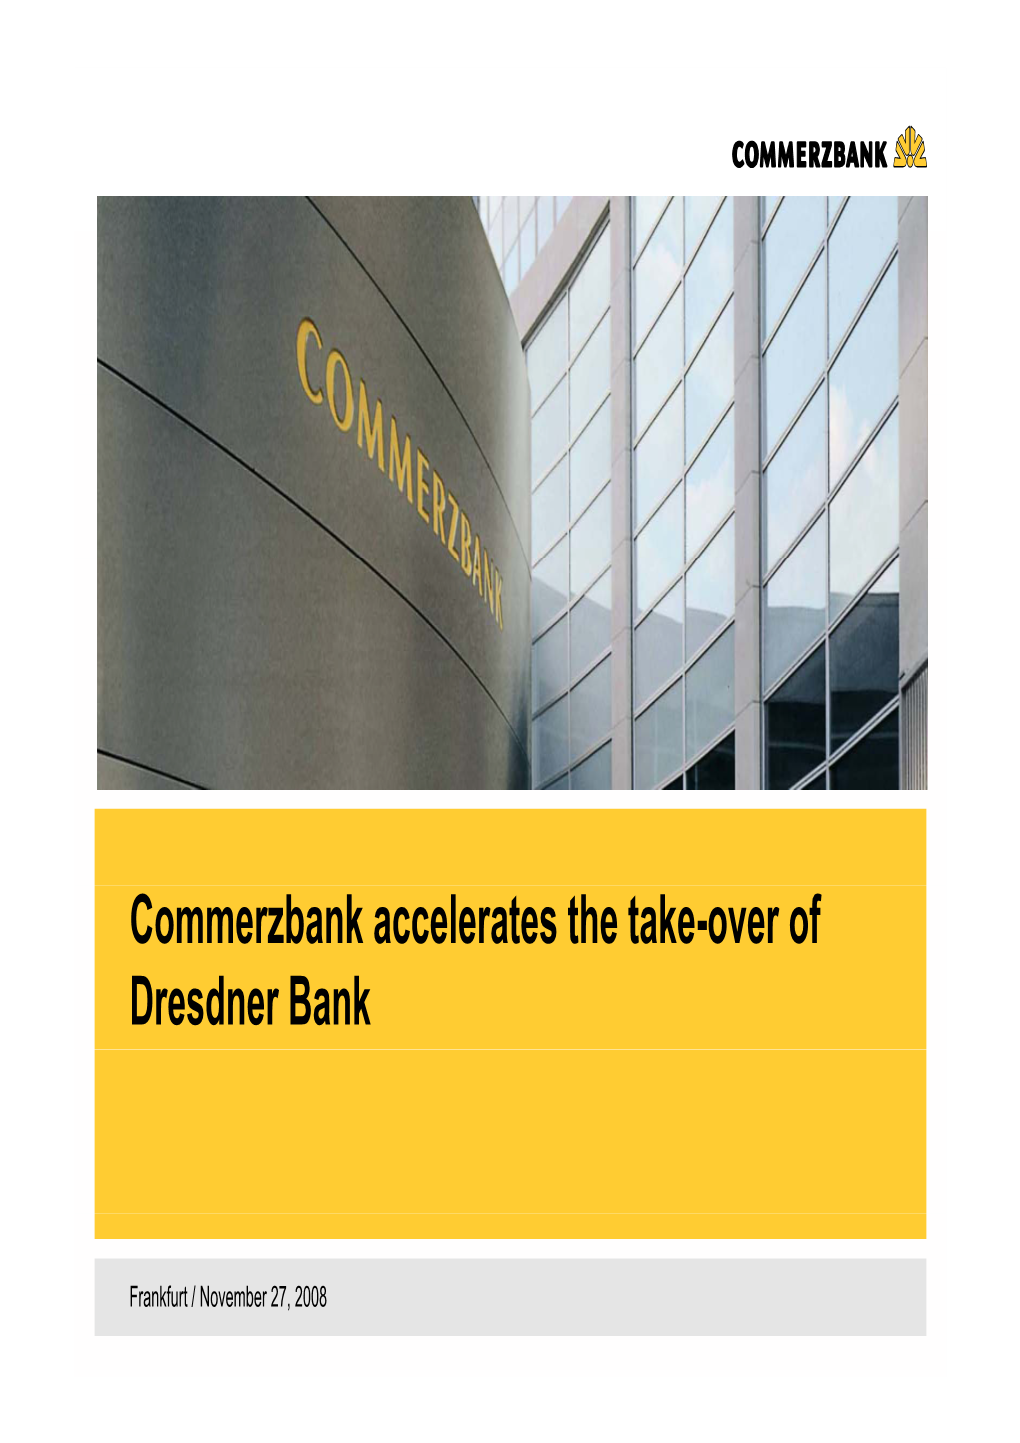 Commerzbank Accelerates the Take-Over of Dresdner Bank